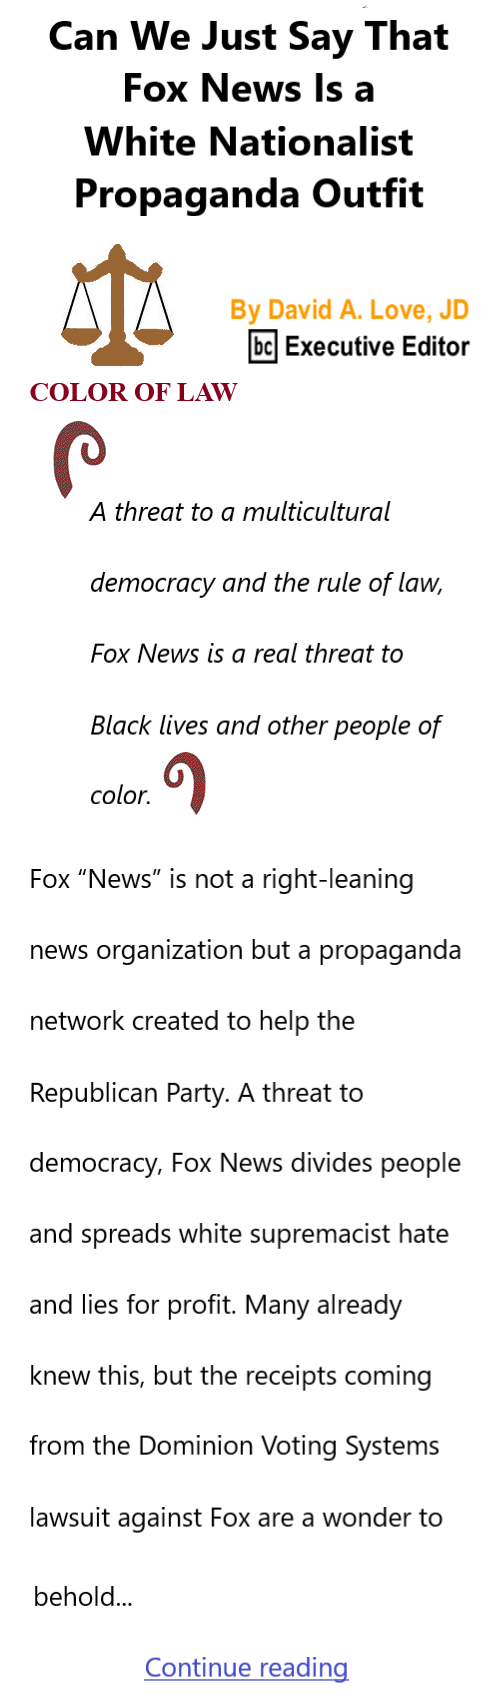 BlackCommentator.com Mar 2, 2023 - Issue 945: Can We Just Say That Fox News Is a White Nationalist Propaganda Outfit - Color of Law By David A. Love, JD, BC Executive Editor